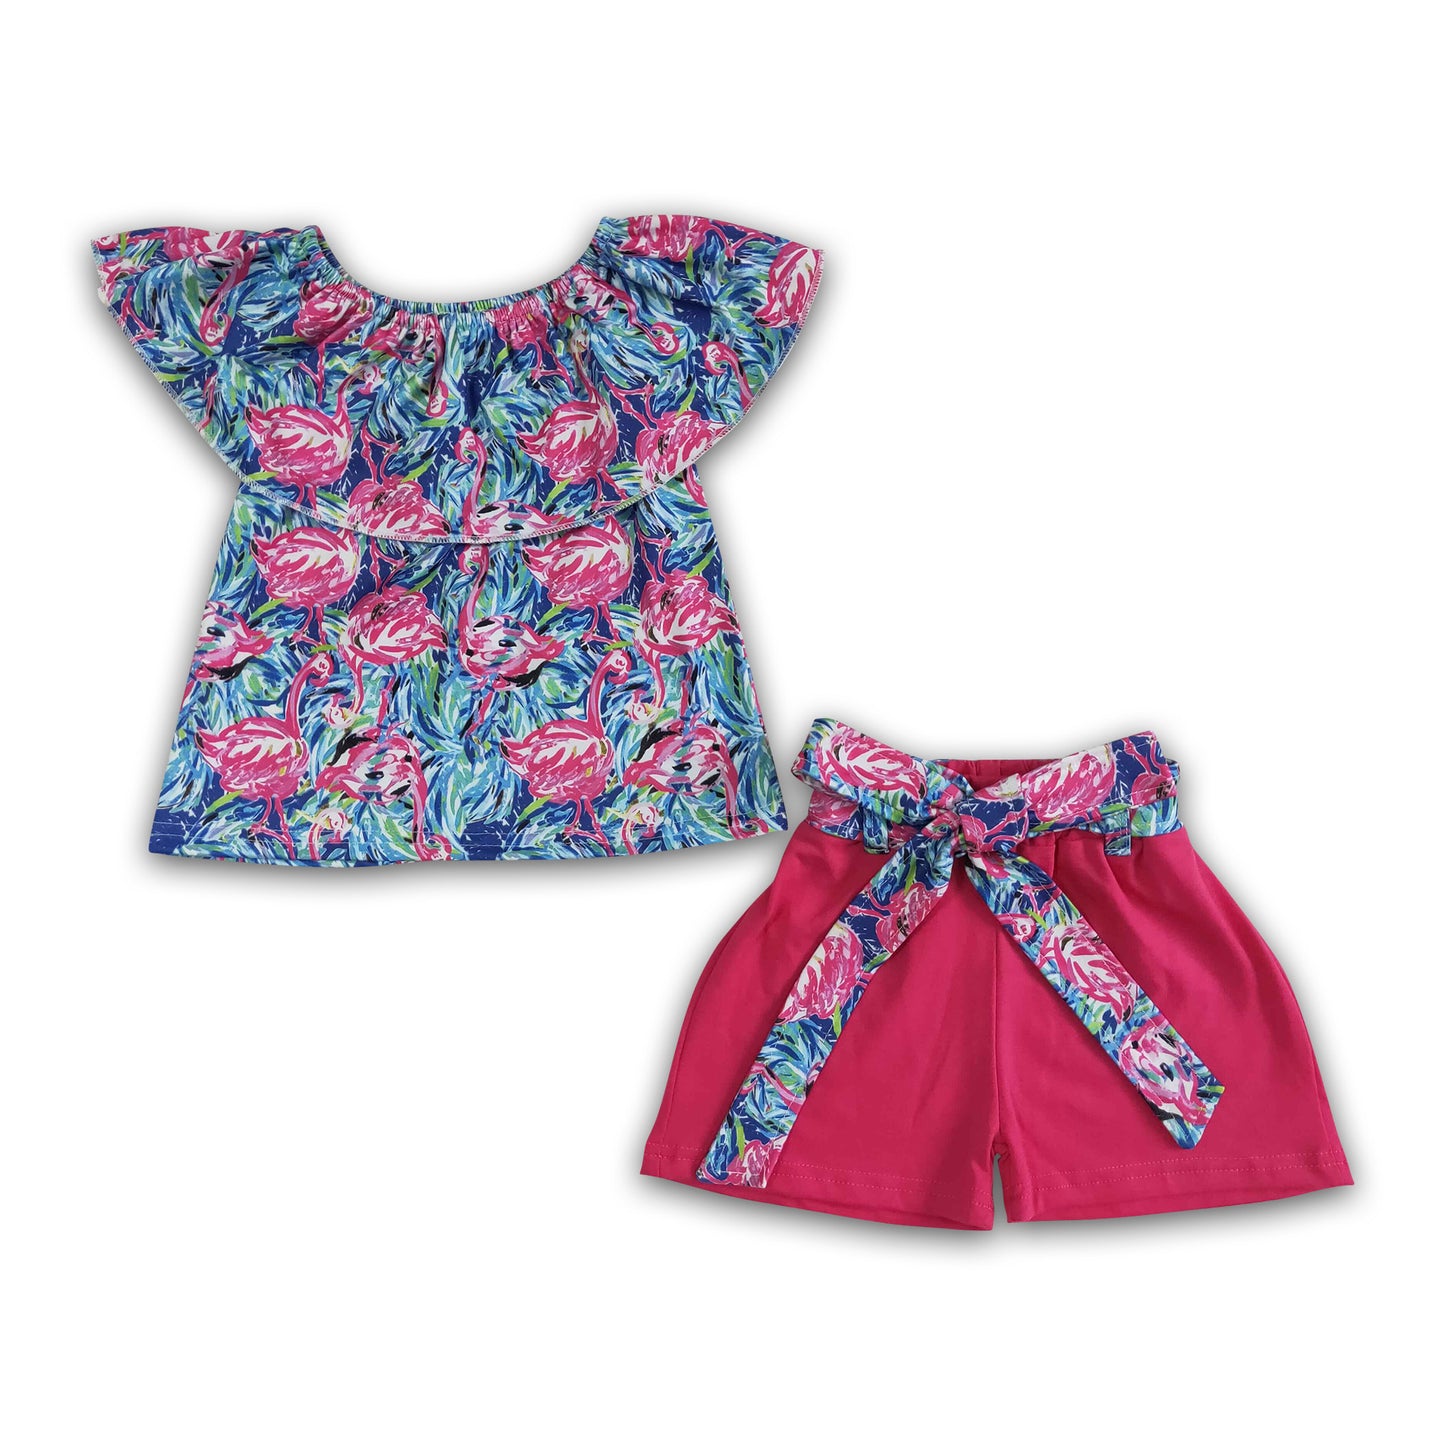 Flamingo shirt solid shorts girls boutique outfits